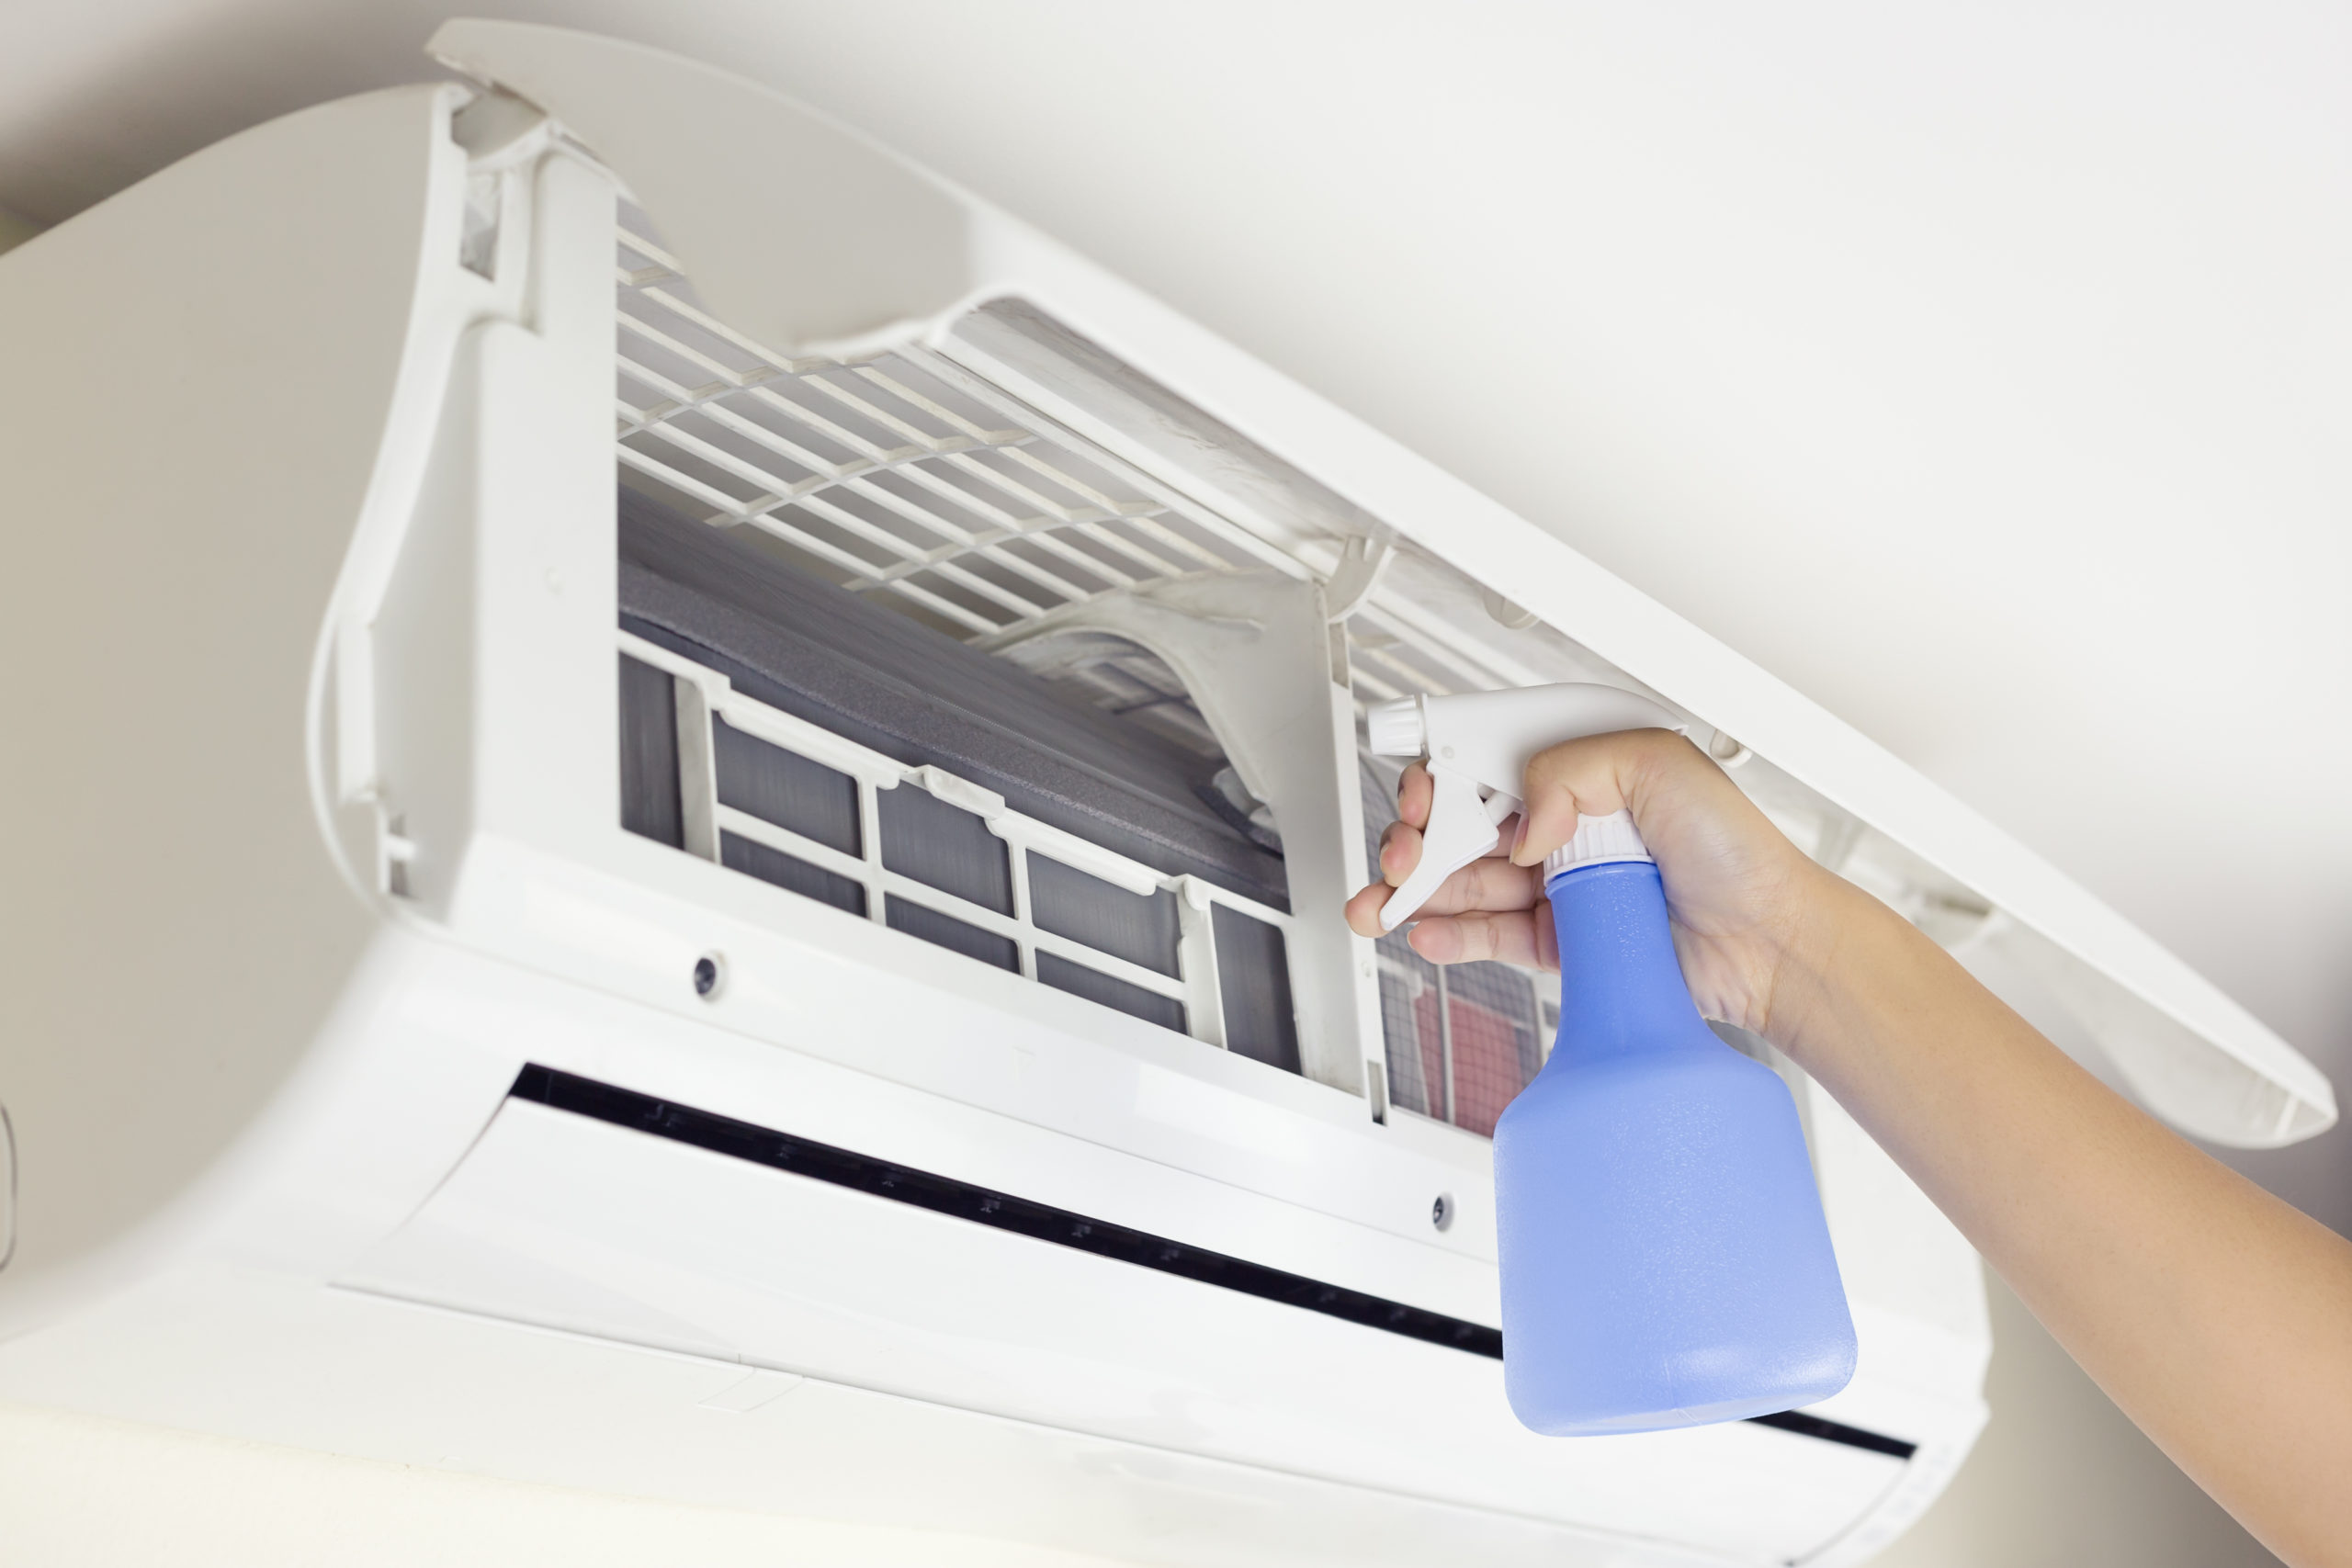 ac tune-up, air conditioning maintenance, air conditioner tune up services in college station